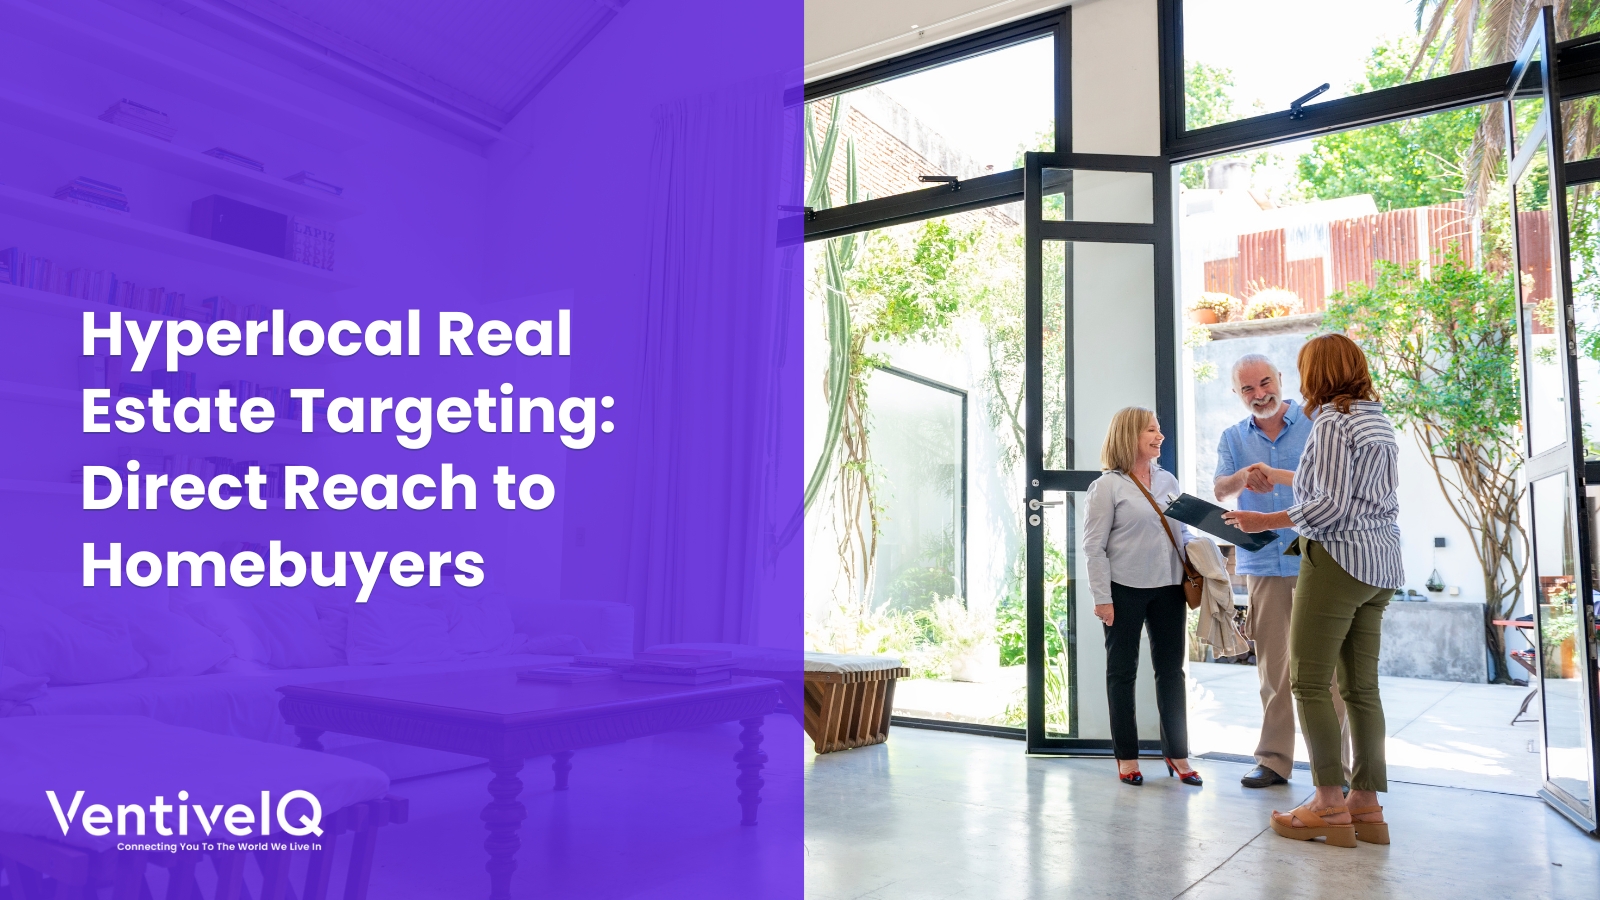 Hyperlocal Real Estate Targeting: Direct Reach to Homebuyers